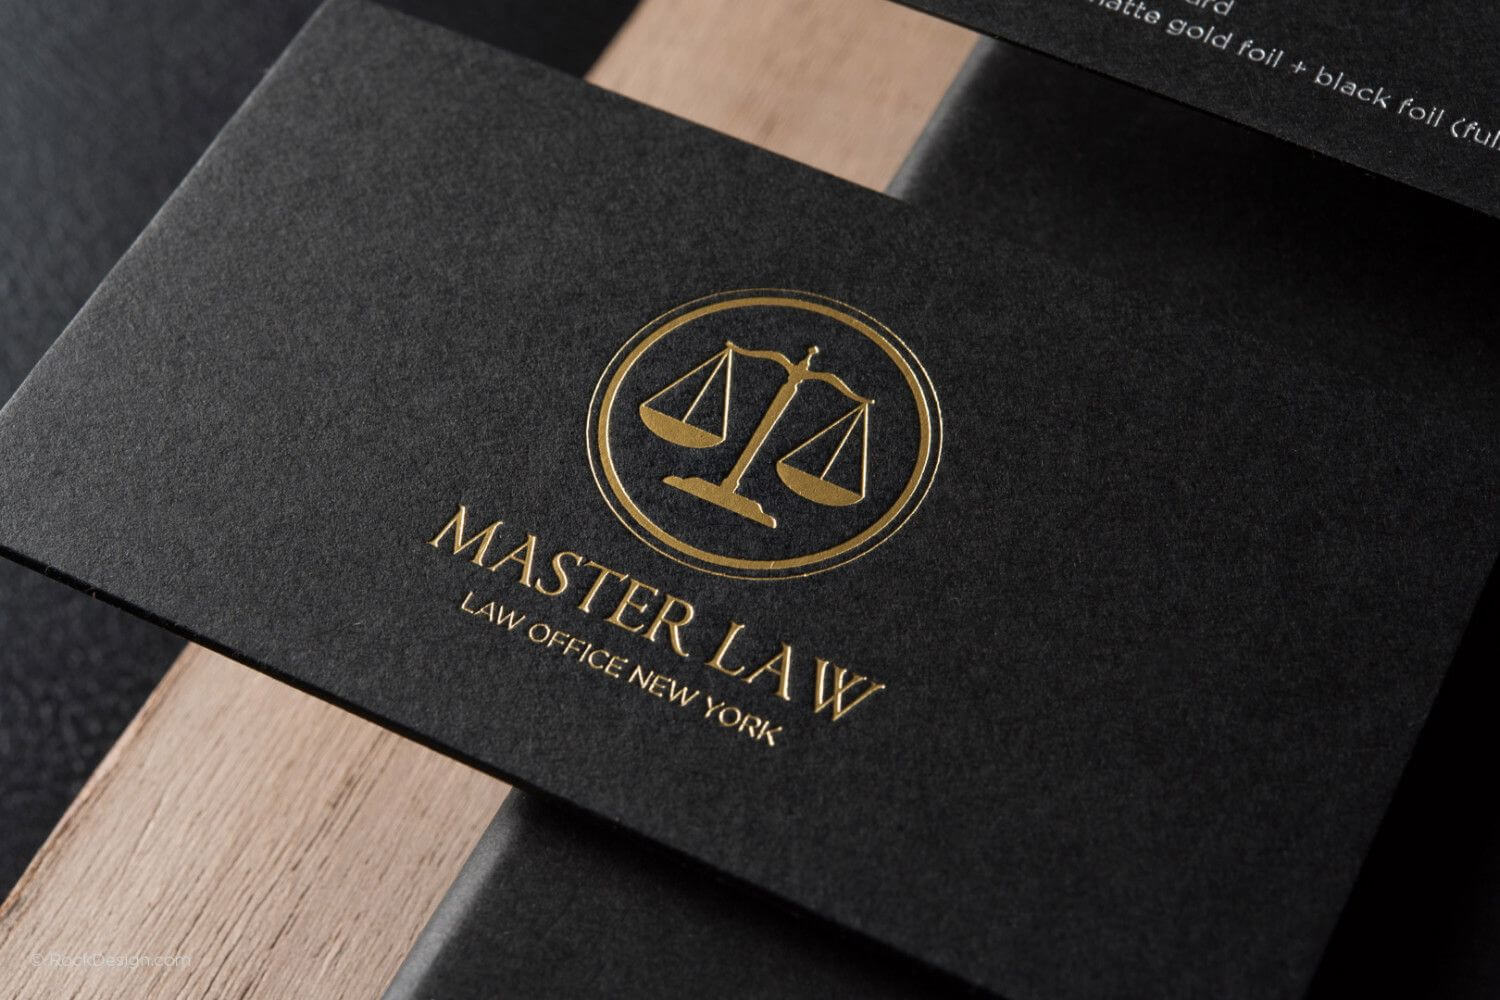 Free Lawyer Business Card Template | Rockdesign | Lawyer Regarding Legal Business Cards Templates Free